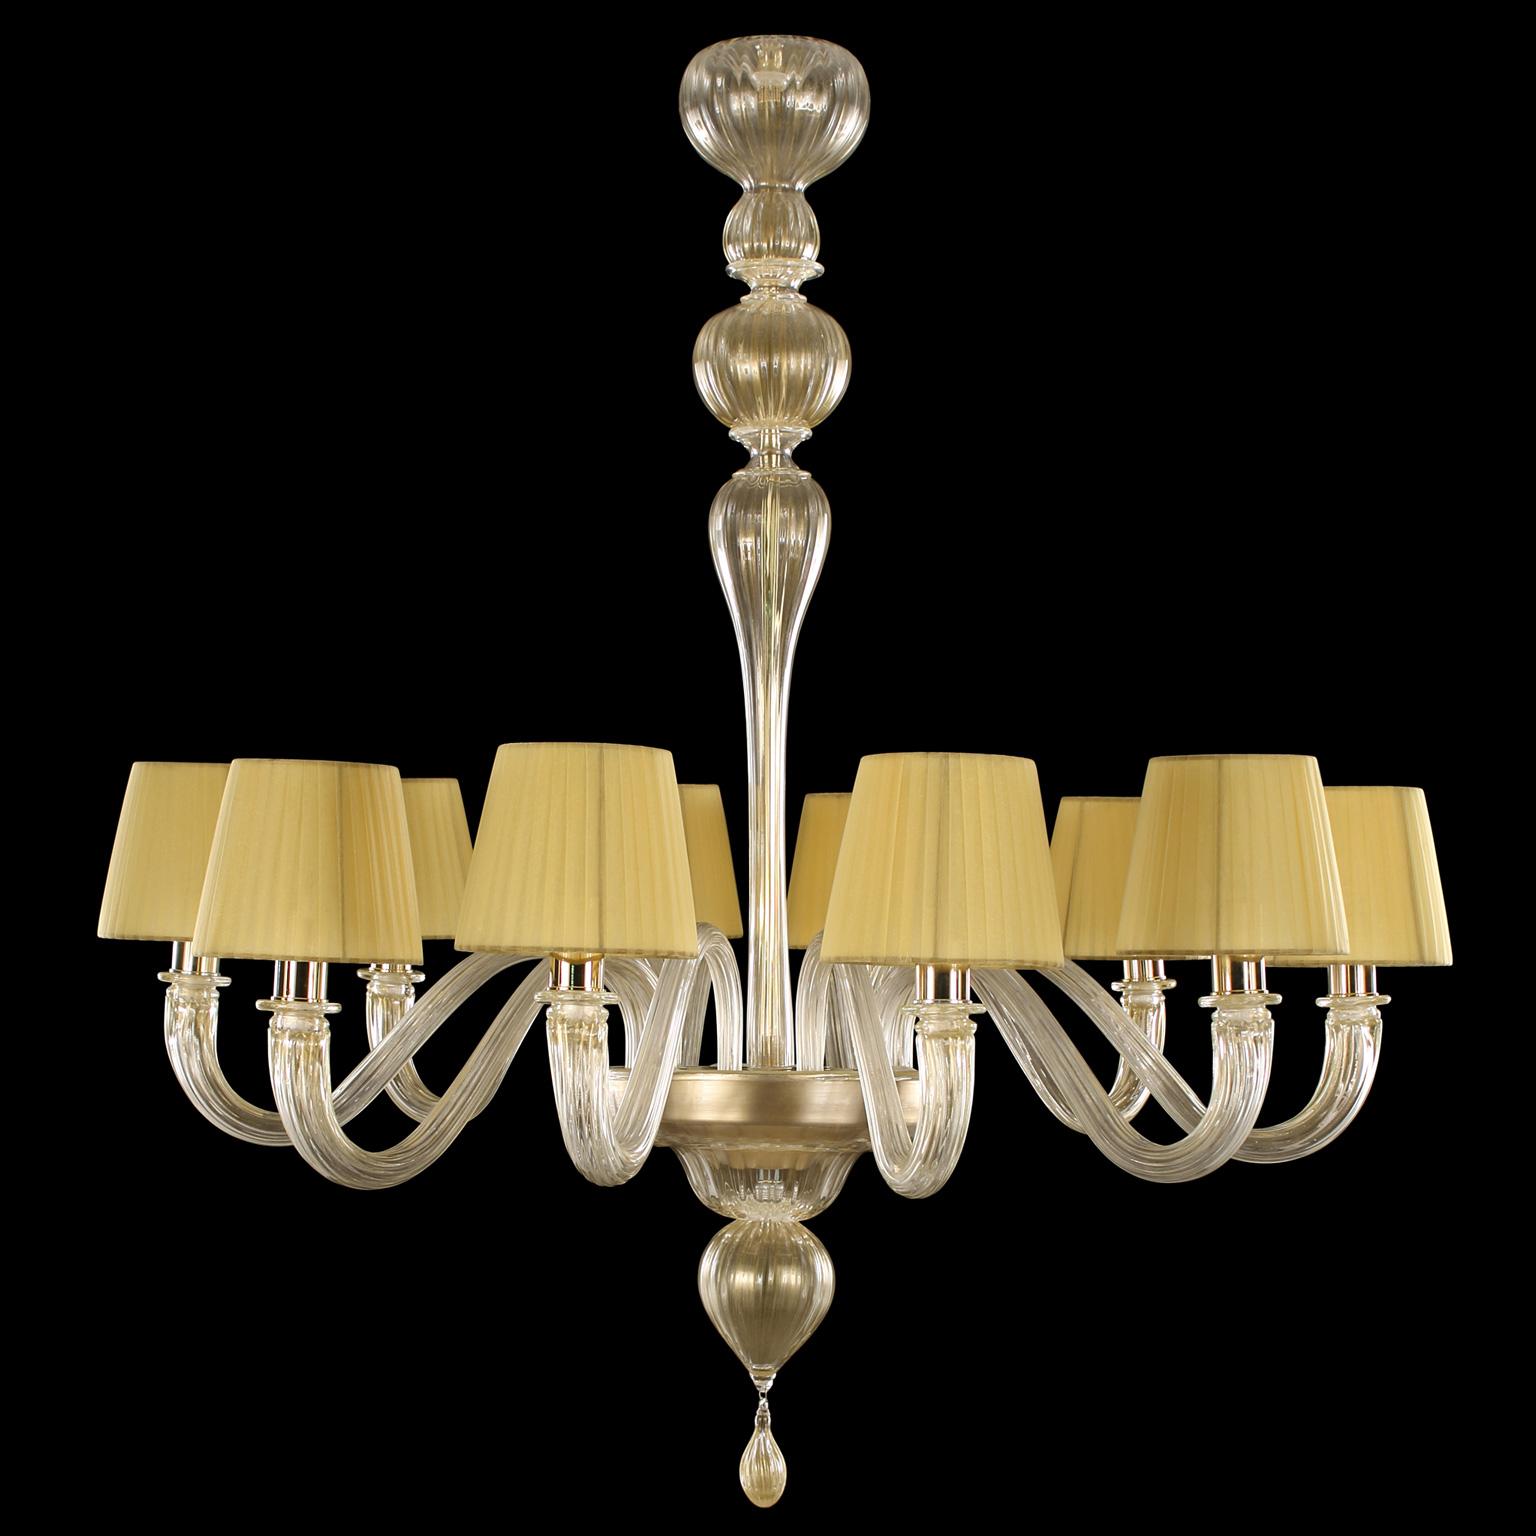 Chapeau chandelier 10 lights artistic gold Murano glass, amber organza handmade in Florence lampshades by Multiforme.
 
Chapeau is a Classic and essential chandelier, it is handcrafted using high quality materials in Murano glass and handmade cotton